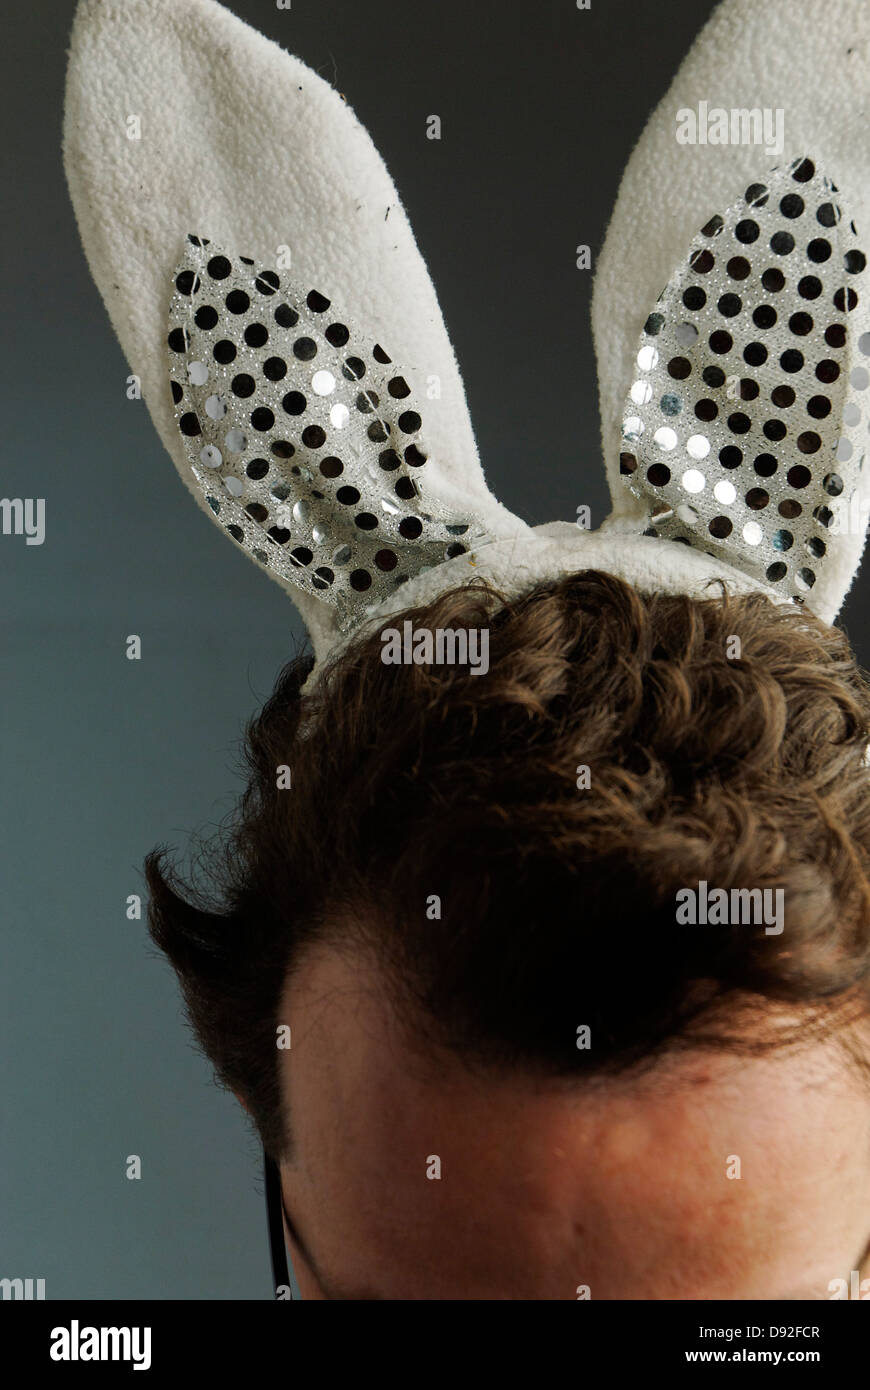 A man with bunny ears on his head Stock Photo